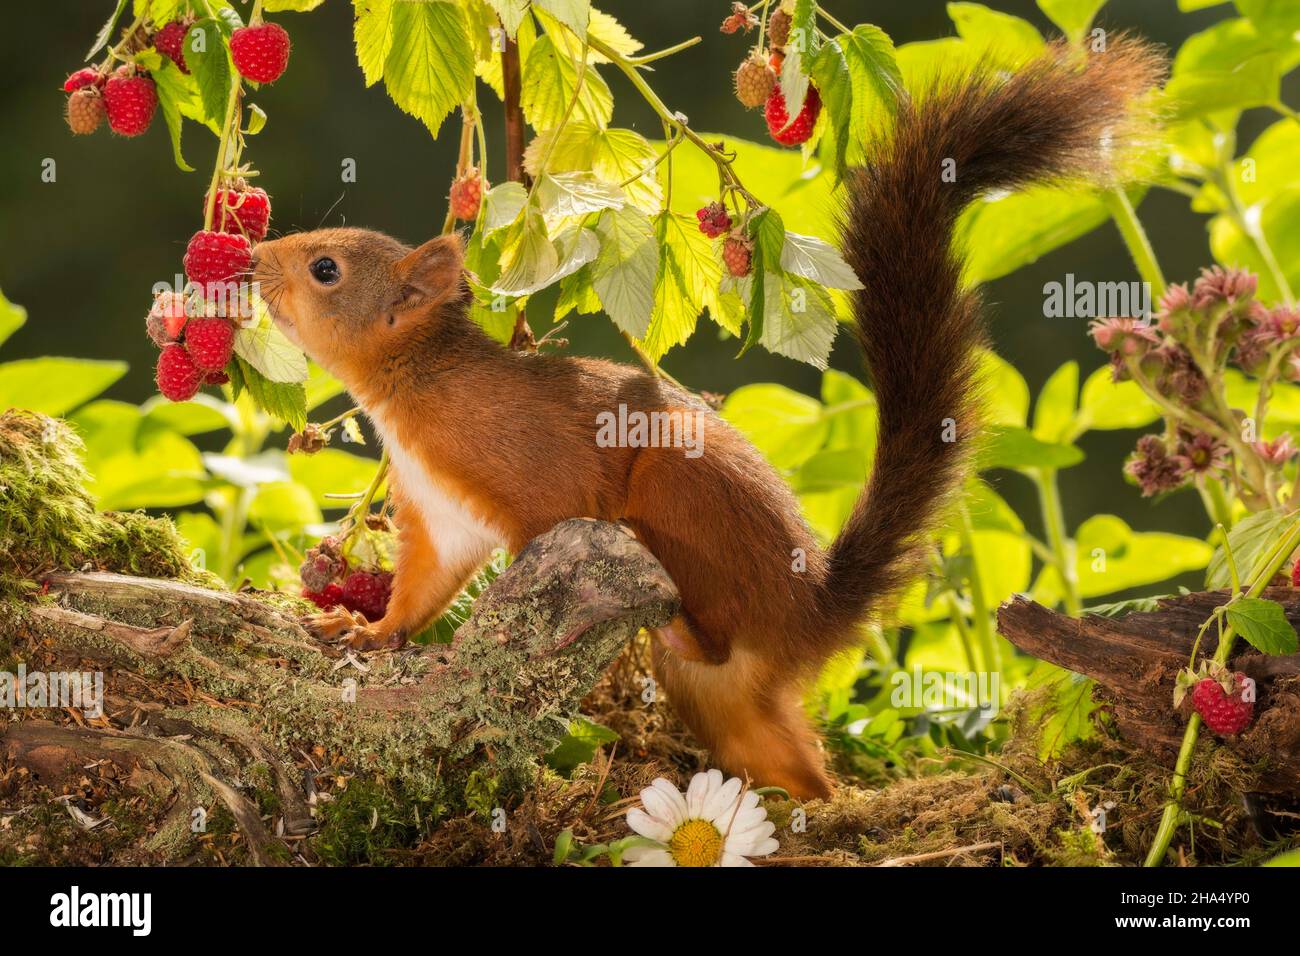 close up of red squirrel investigate a raspberry Stock Photo